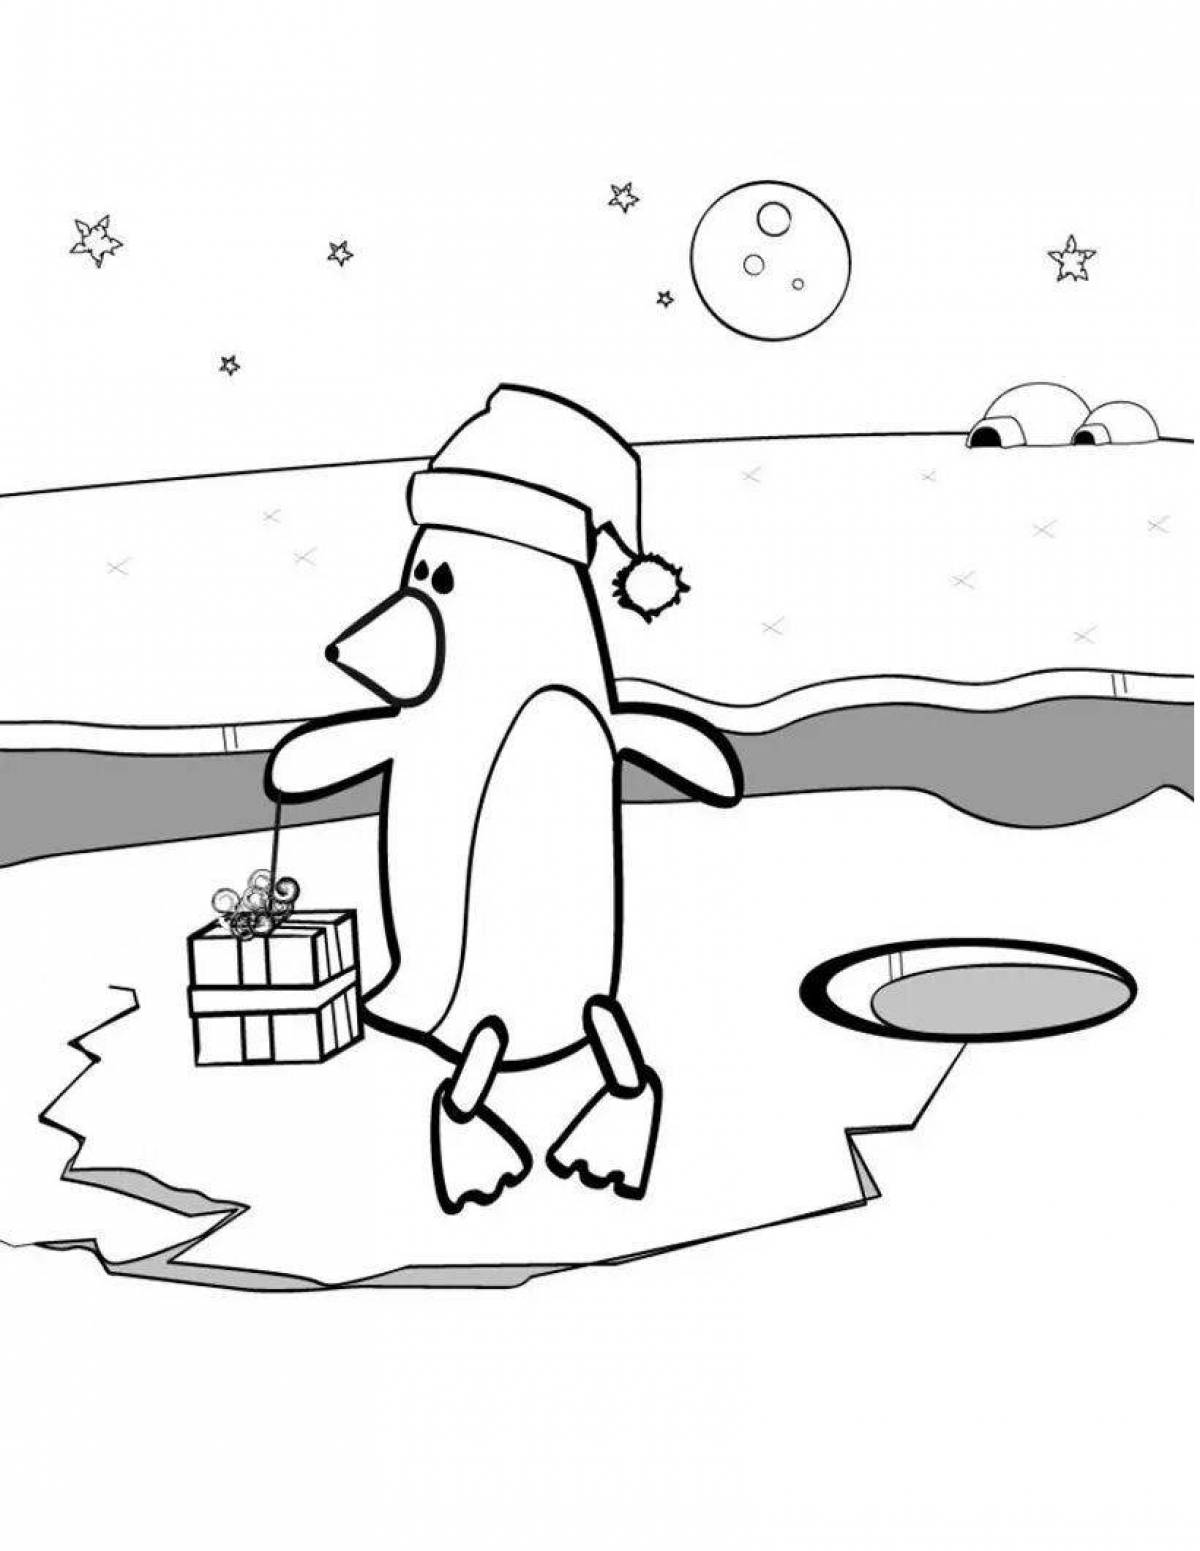 Coloring book of live penguin on ice